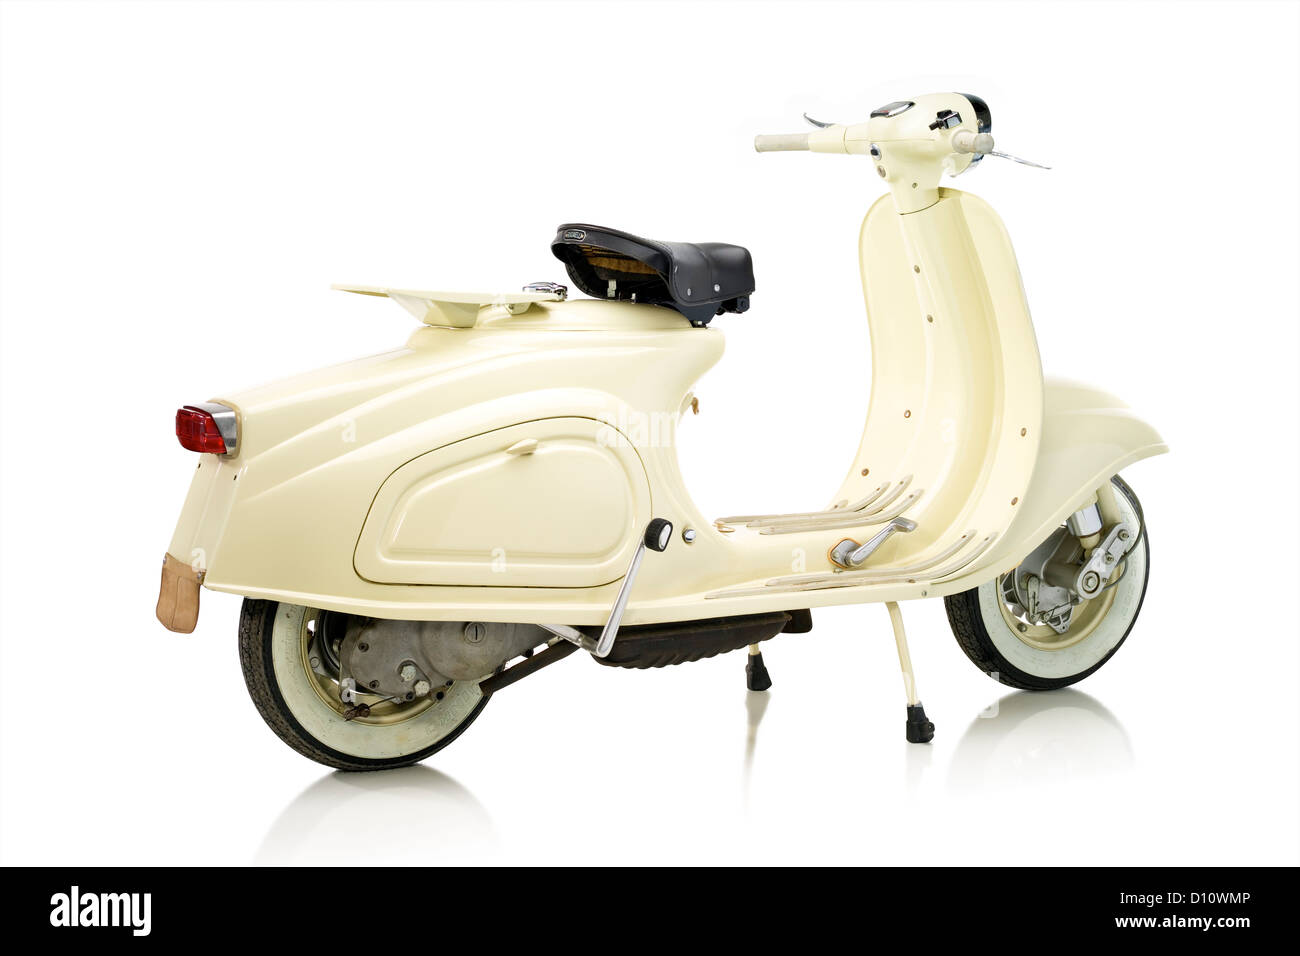 1960 MV Agusta Chicco Scooter Stock Photo